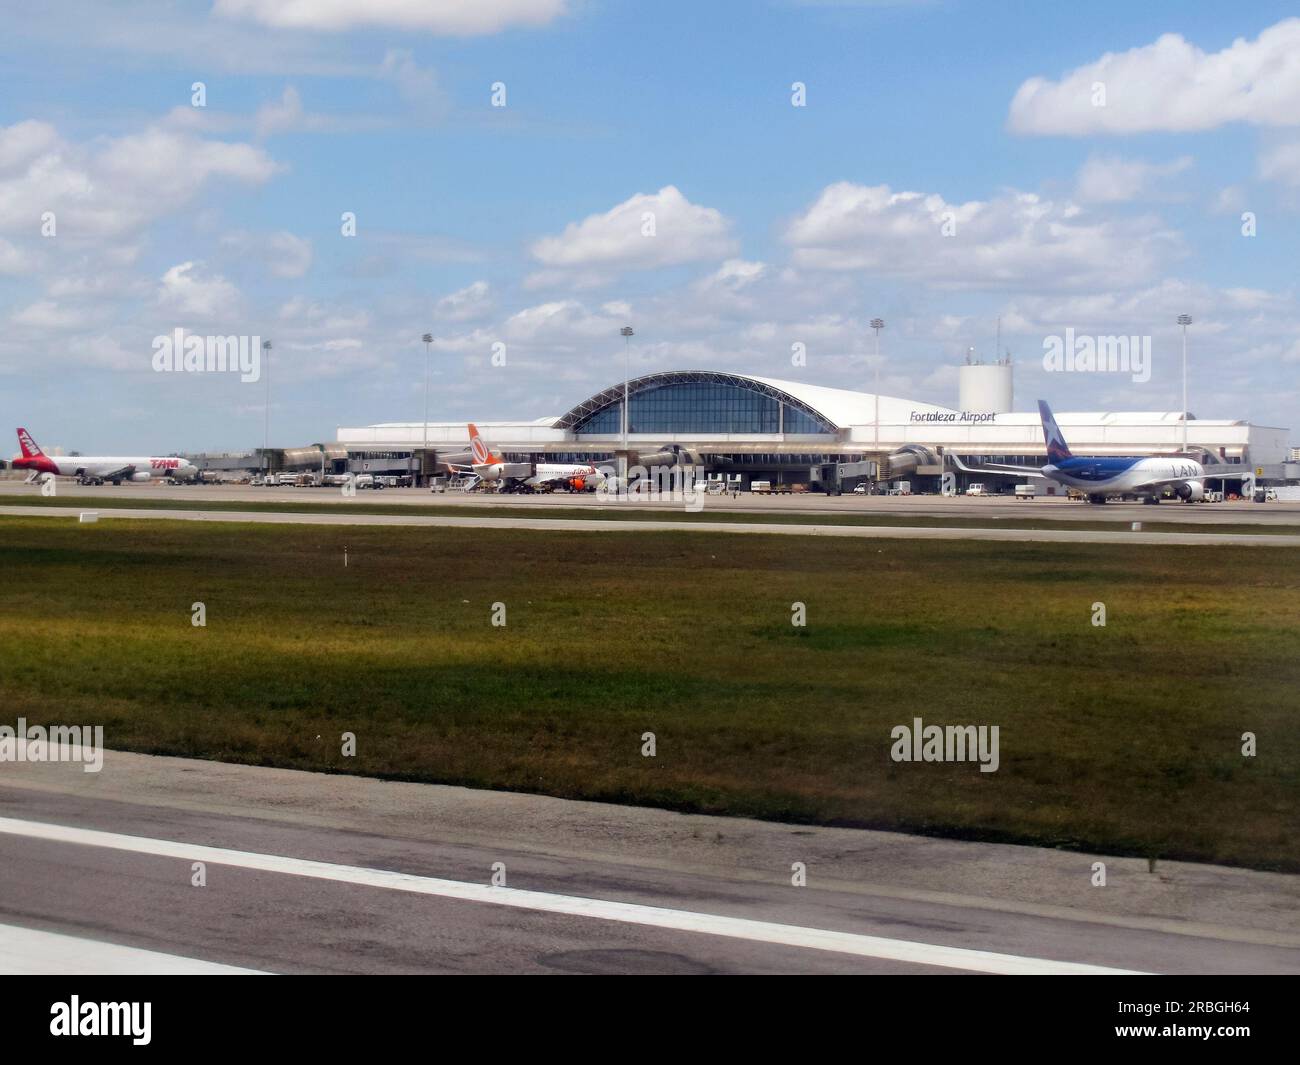 Fortaleza, Ceara, Brazil - July 28, 2018: view of Fortaleza international airport - Pinto Martins (FOR) Stock Photo